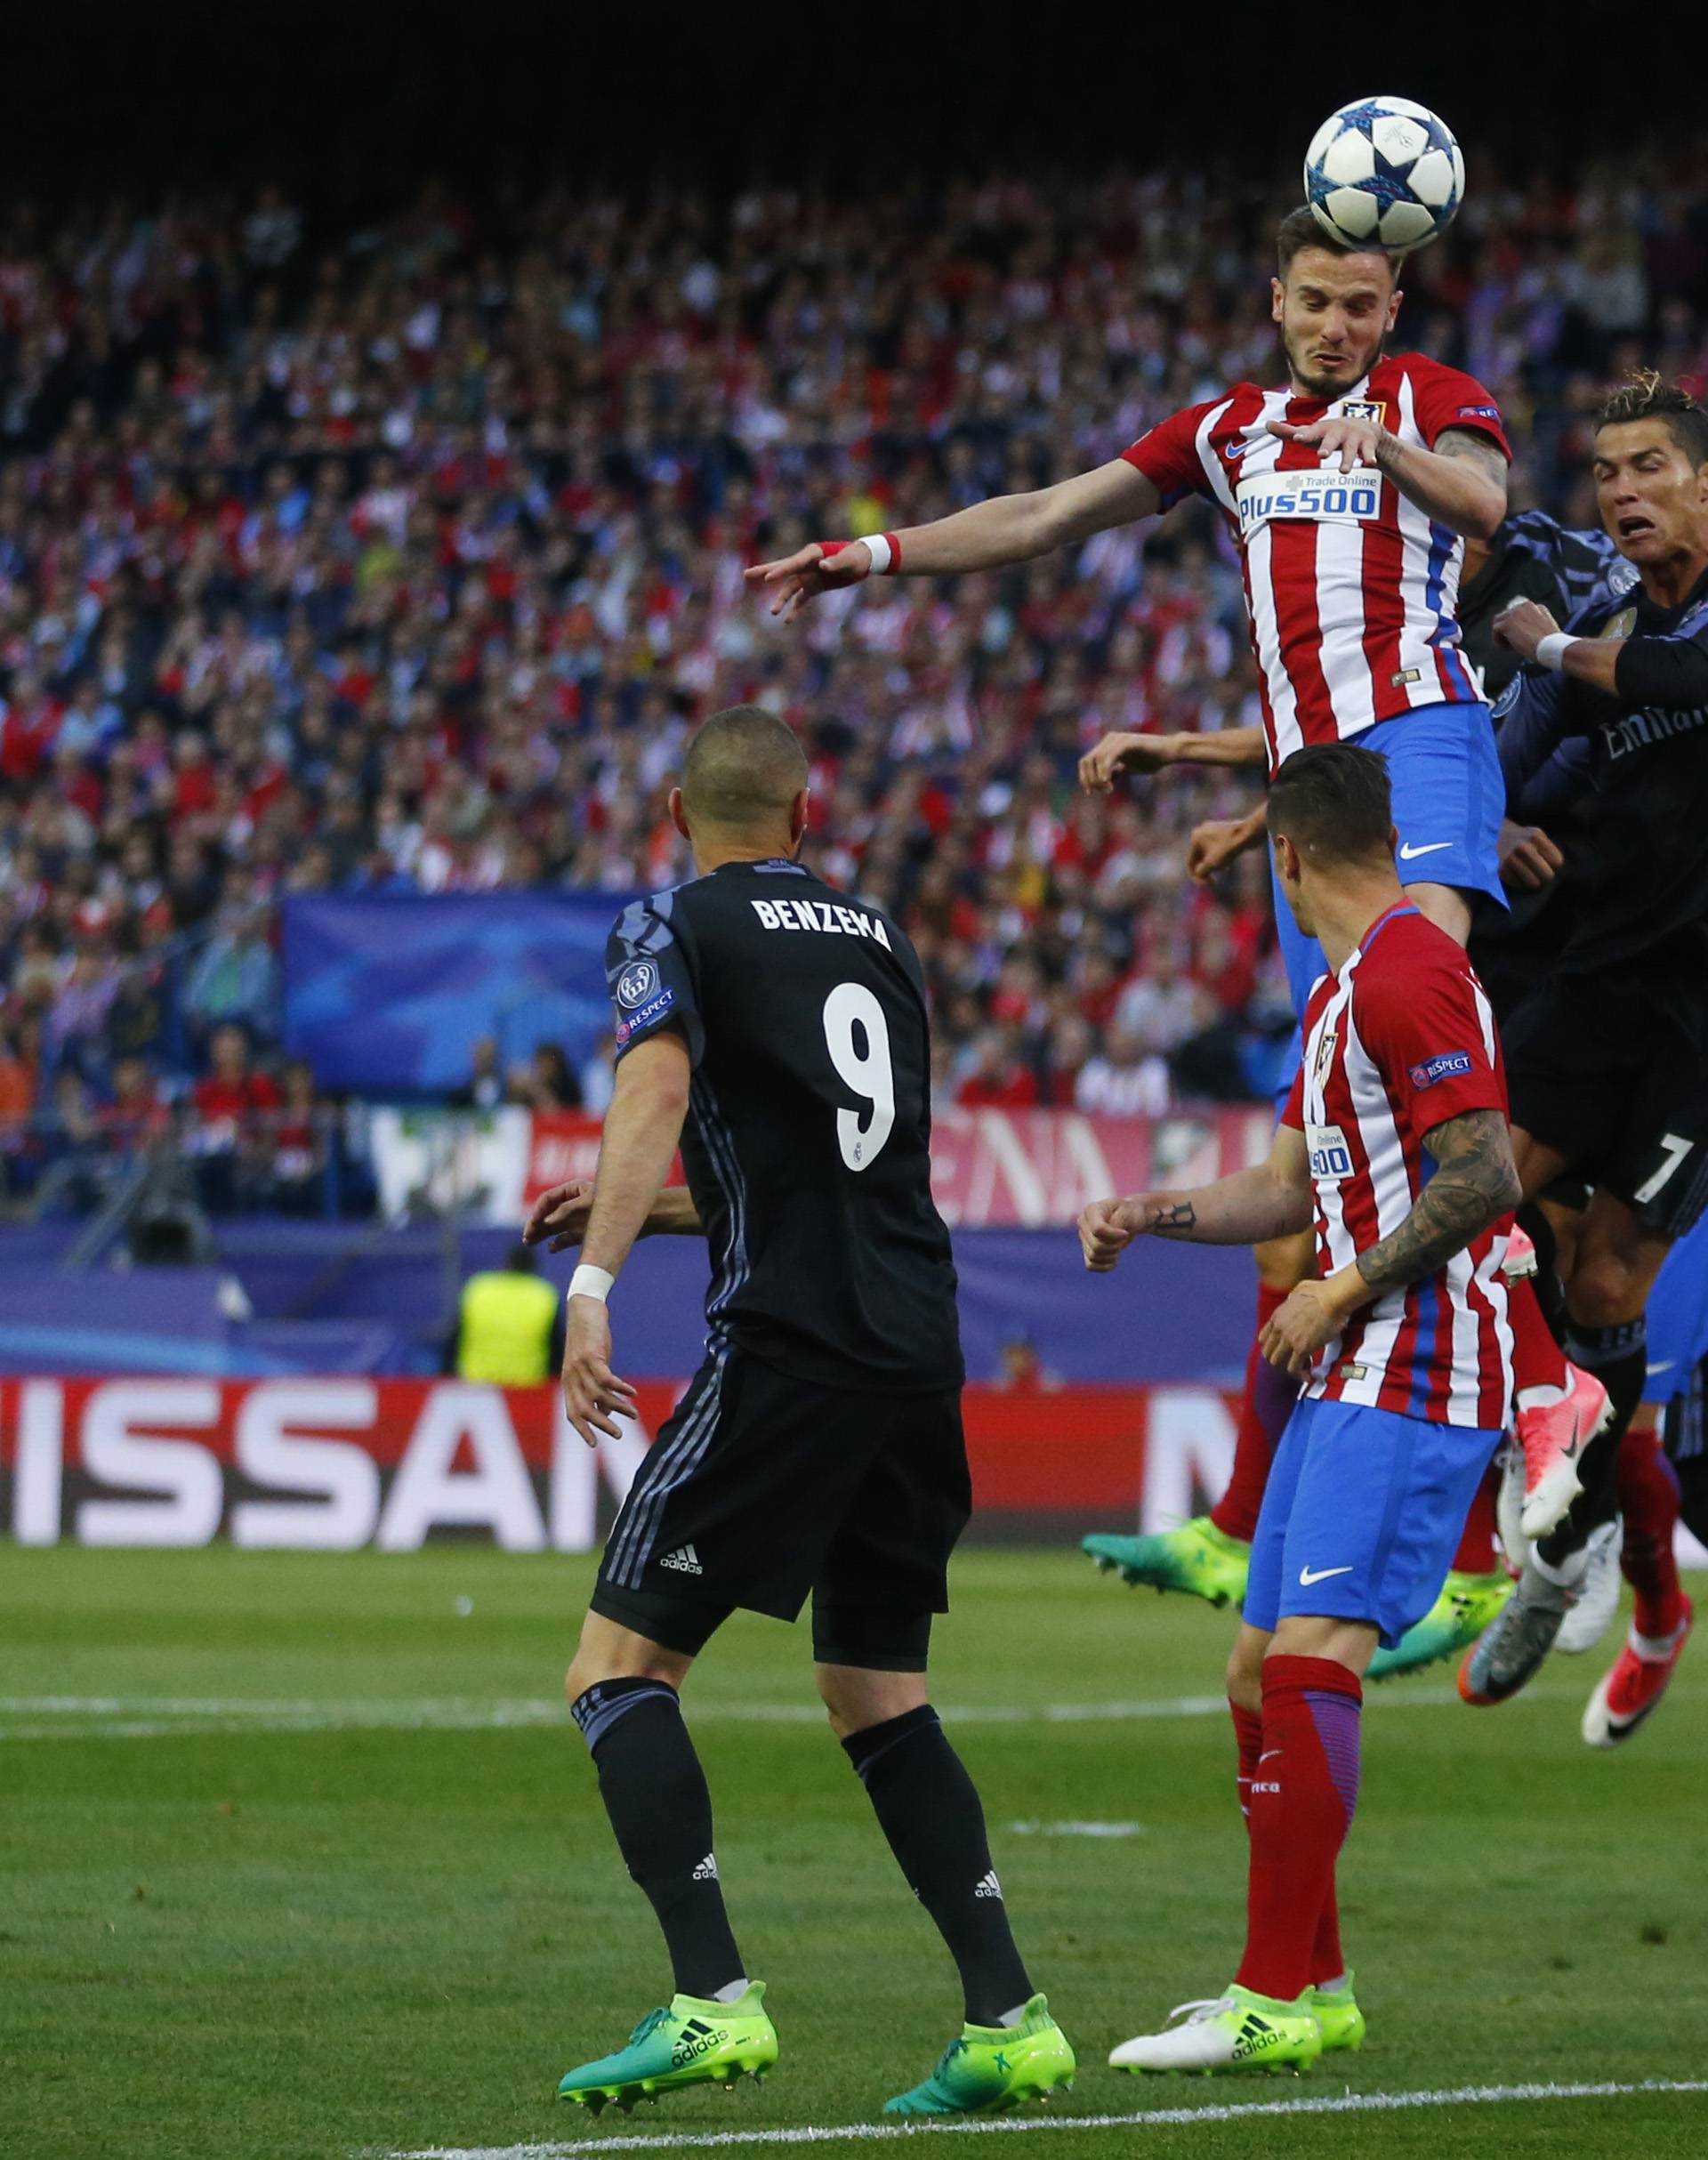 Atletico Madrid's Saul Niguez scores their first goal